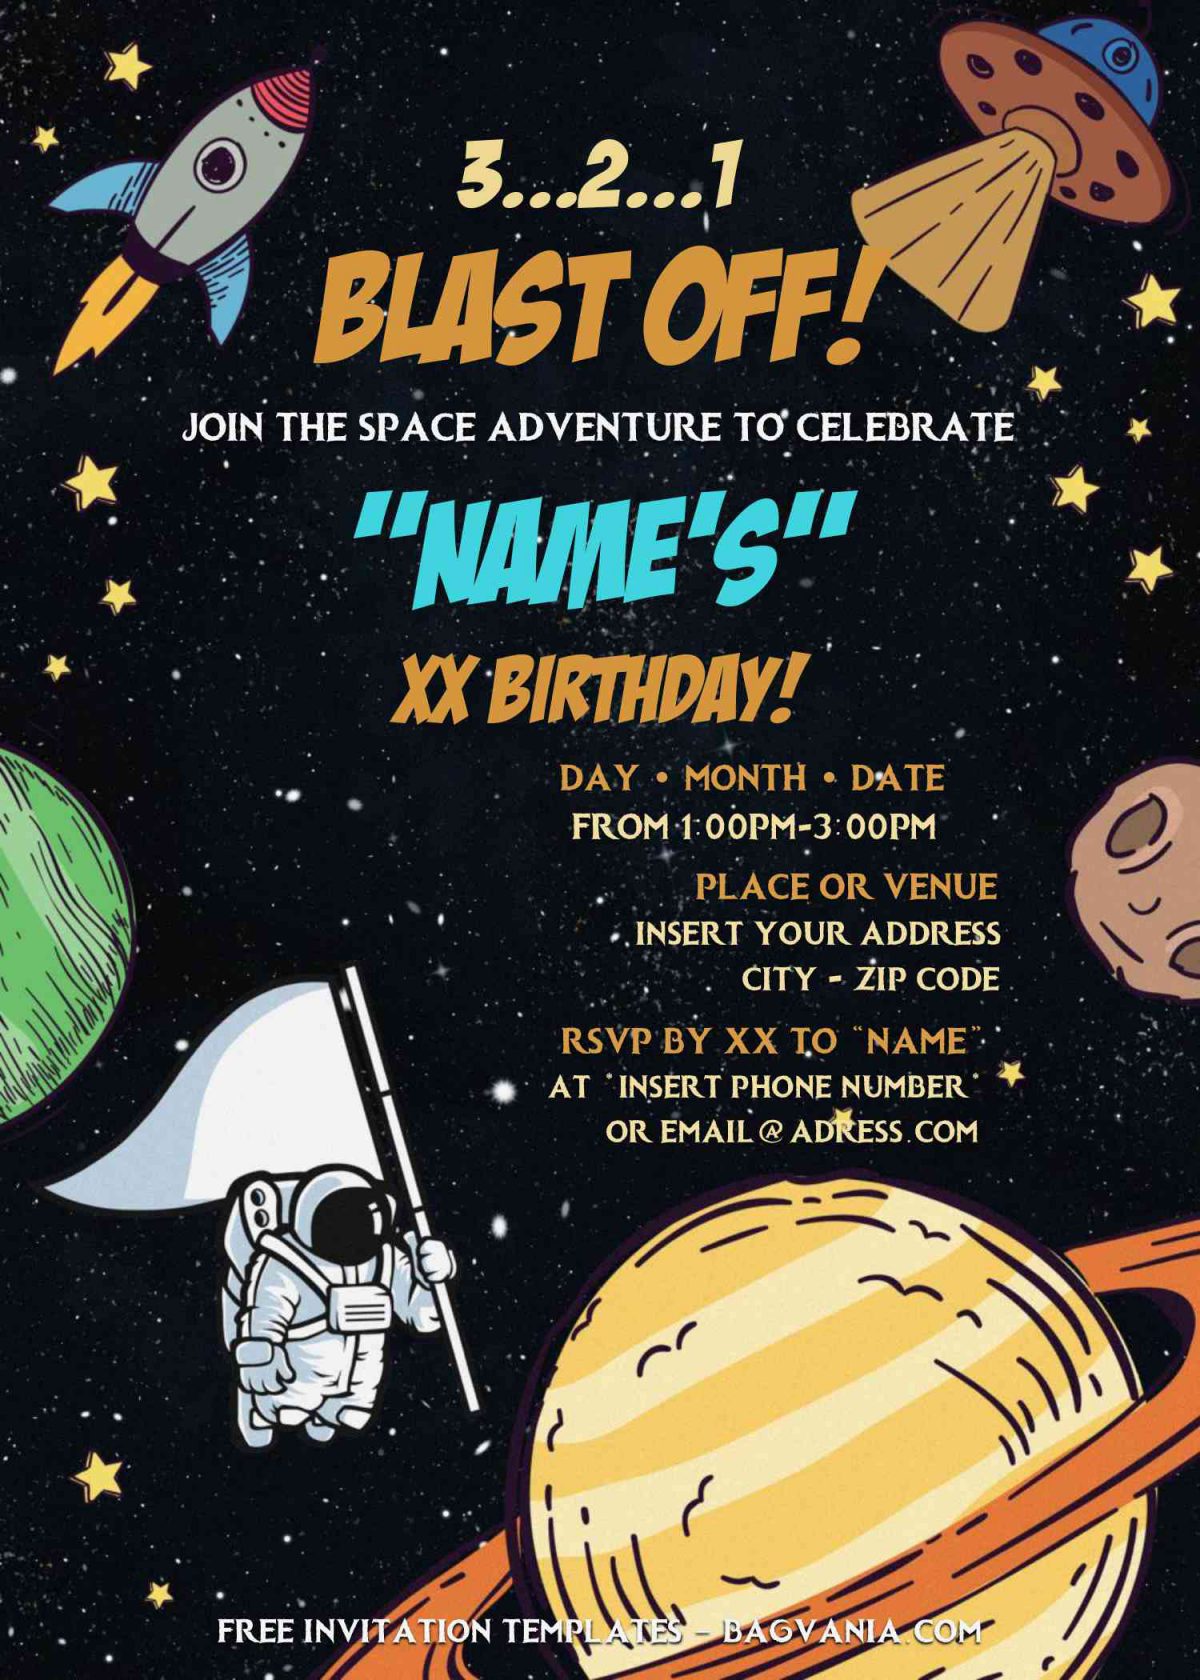 Free Astronaut Birthday Invitation Templates For Word spaceship and neil armstrong